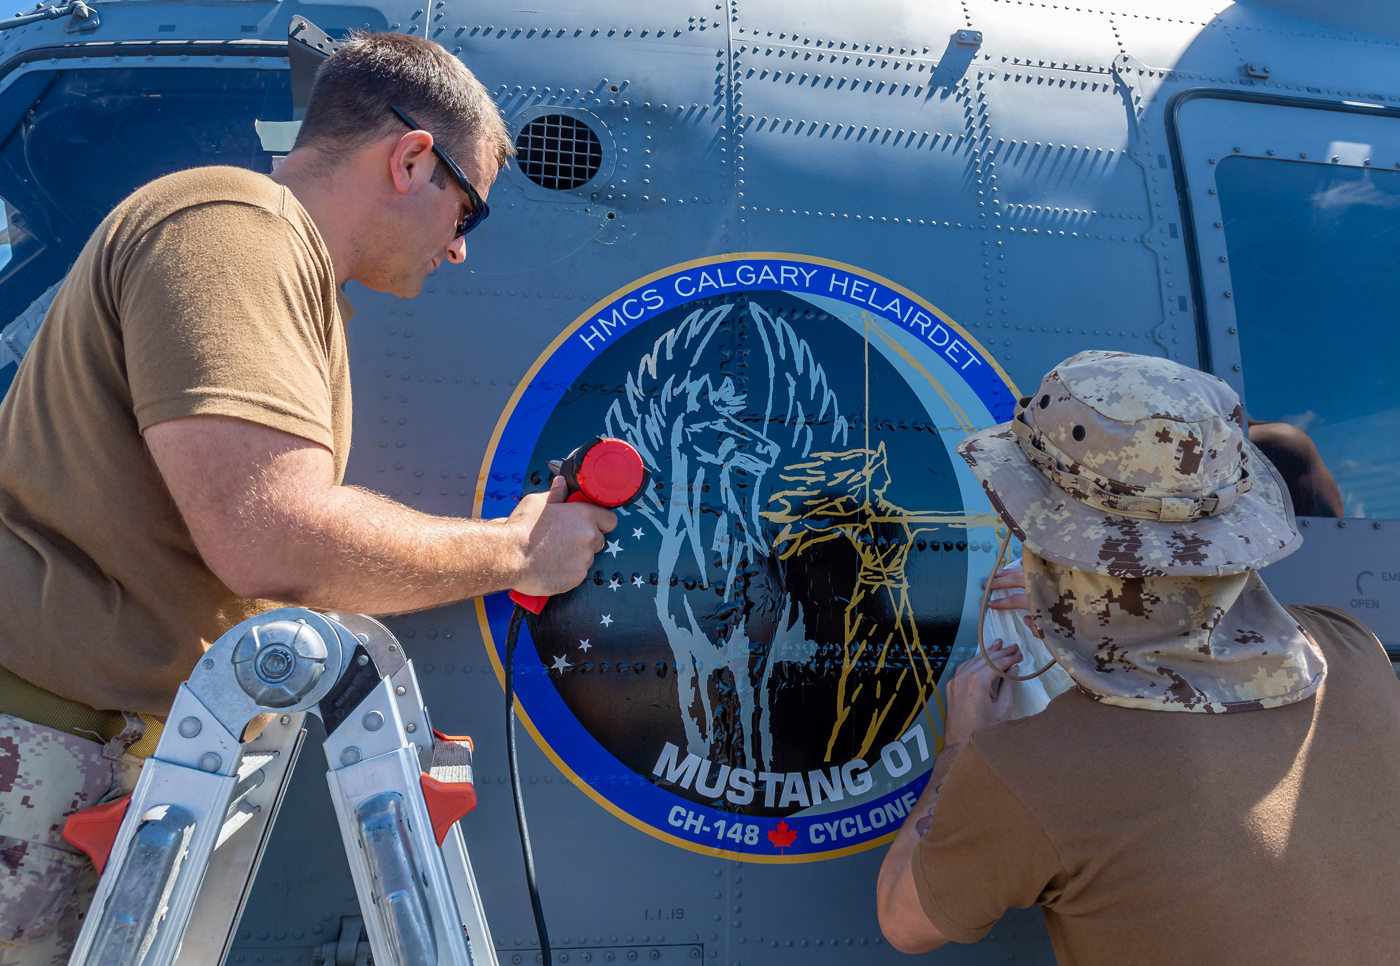 Master Corporal Andrew Finnigan, an Aviation Systems Technician, and Corporal Brendan Wales, an Aircraft Structures Technician, apply the detachment’s operational decal to the CH-148 Cyclone. Photos by Cpl Lynette Ai Dang, Imagery Technician